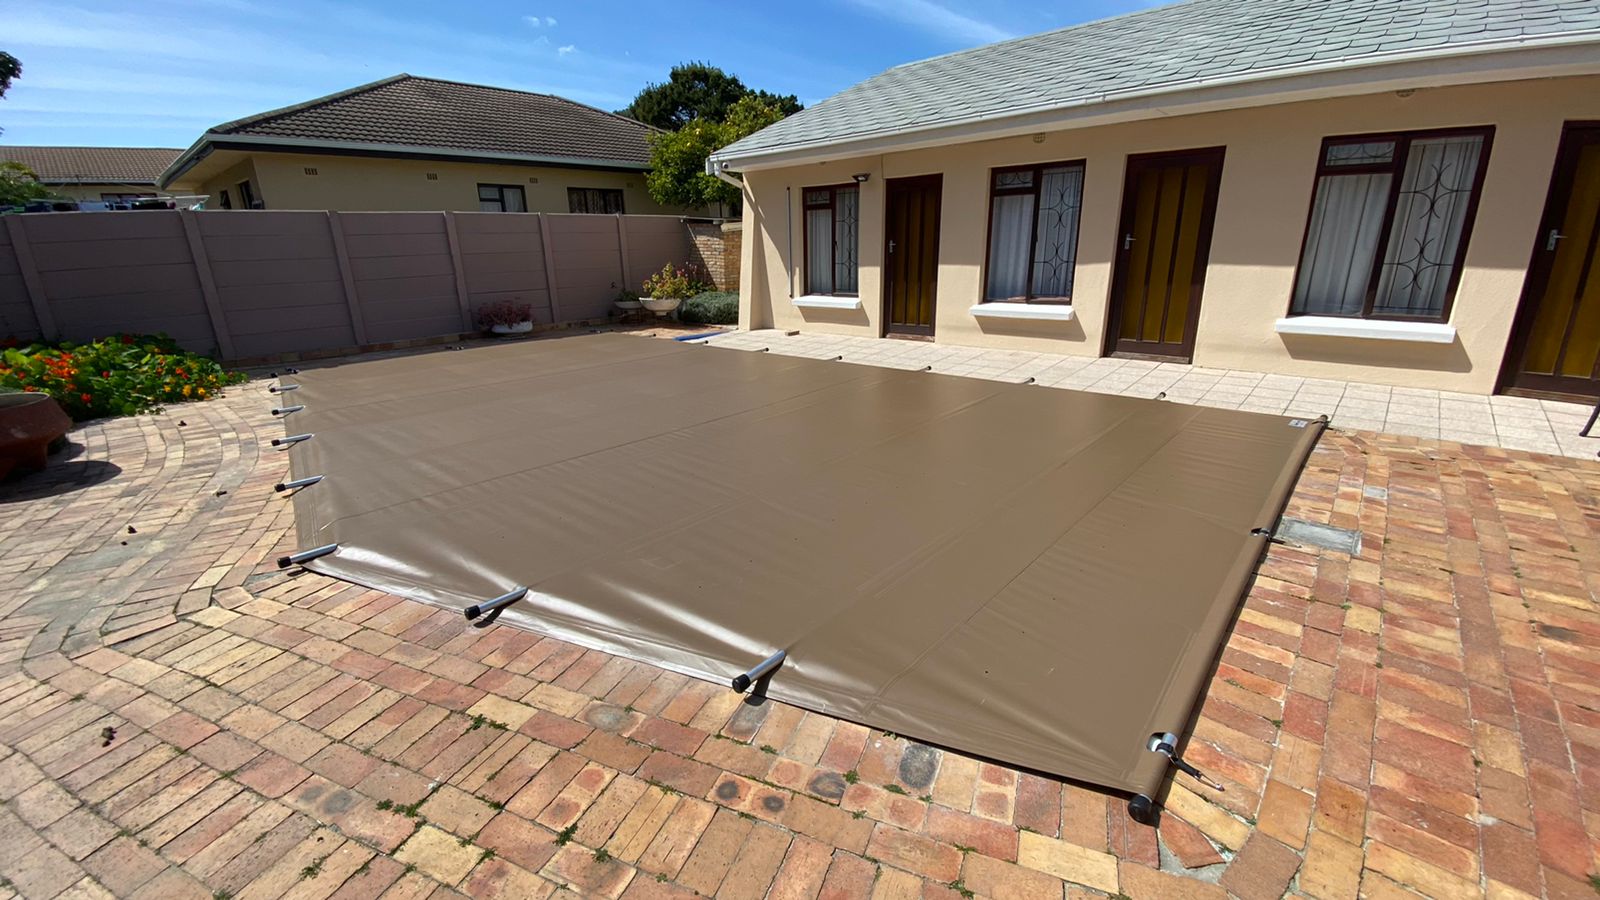 Would it be a good idea to install an automatic pool cover?